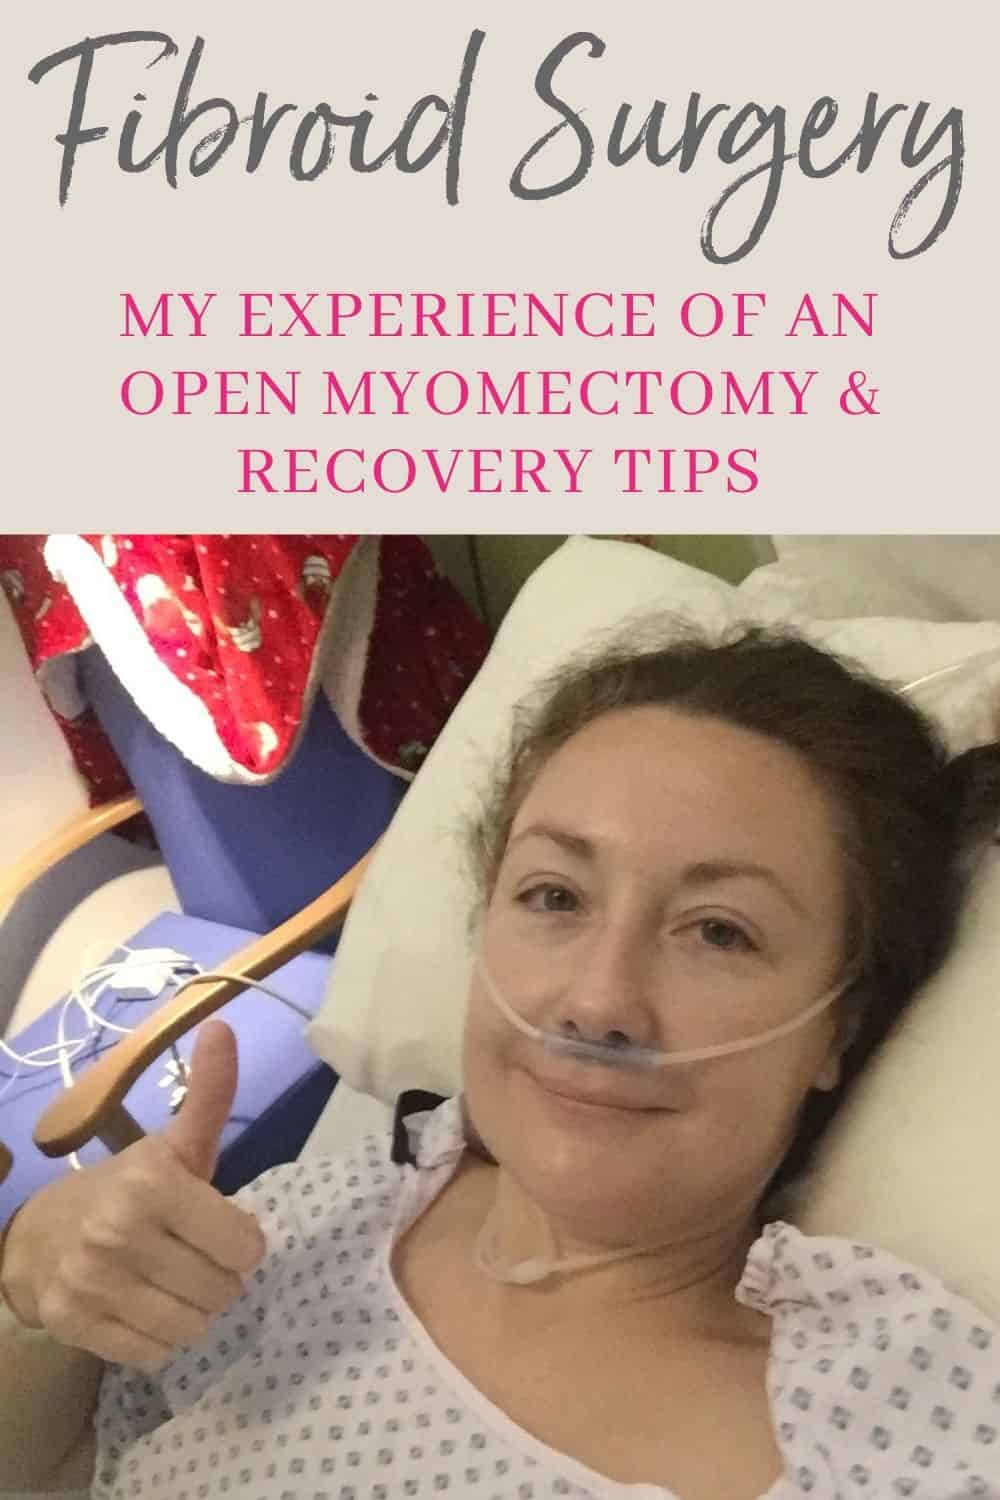 My experience of open myomectomy surgery to remove fibroids (and recovery tips). 